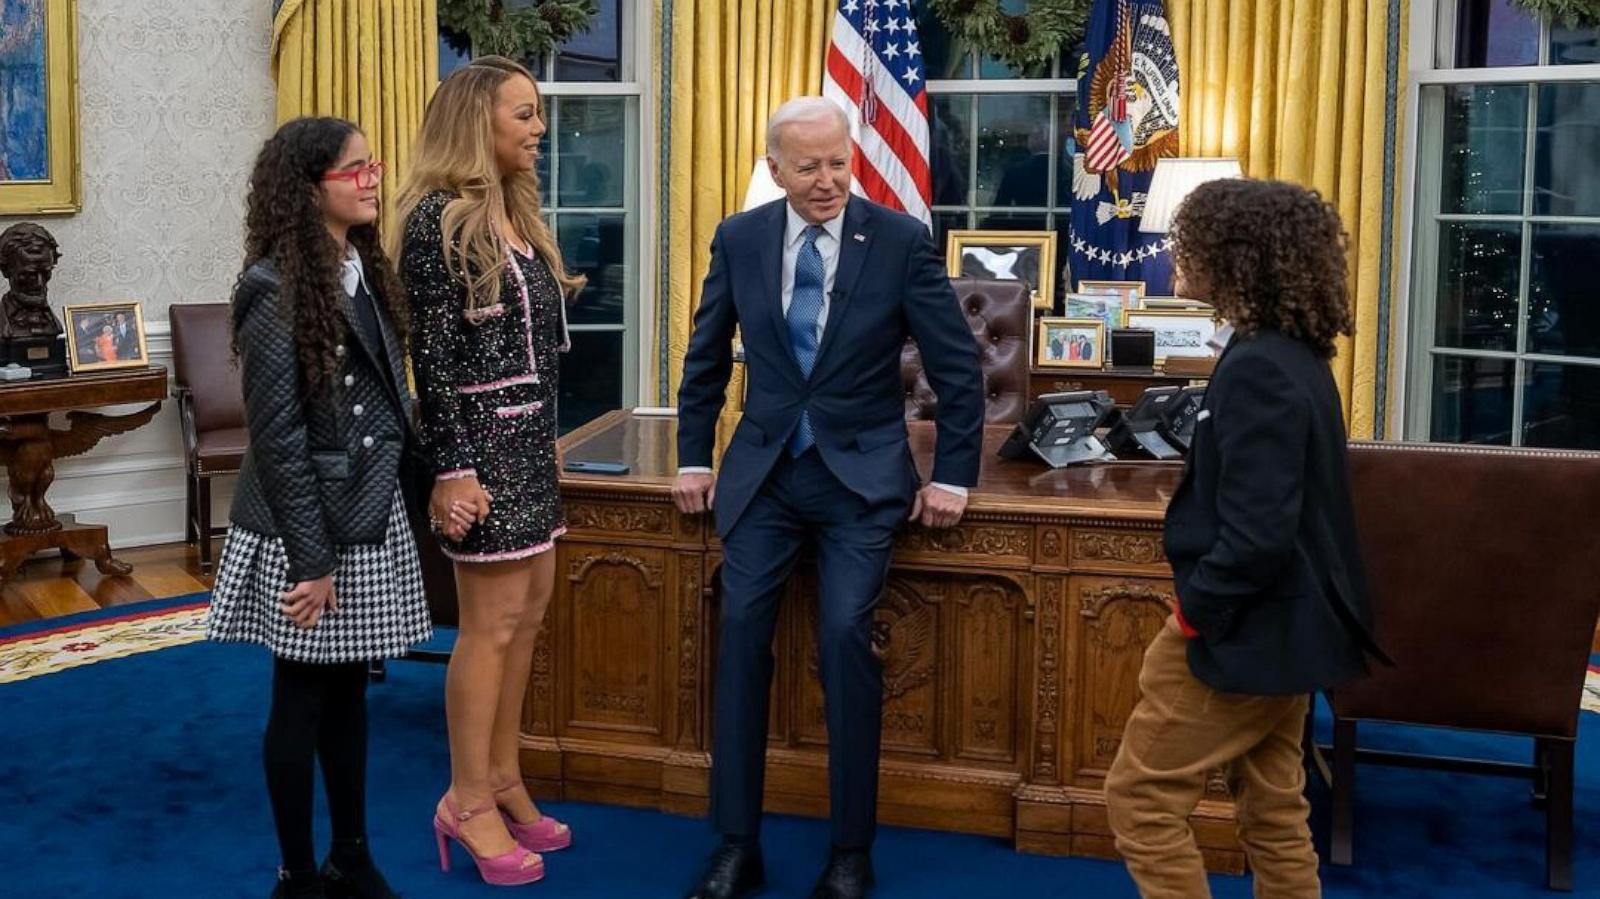 PHOTO: President Joe Biden speaks with Mariah Carey, her daughter Monroe and her son Moroccan, in the Oval Office of the White House, in Washington, D.C.,